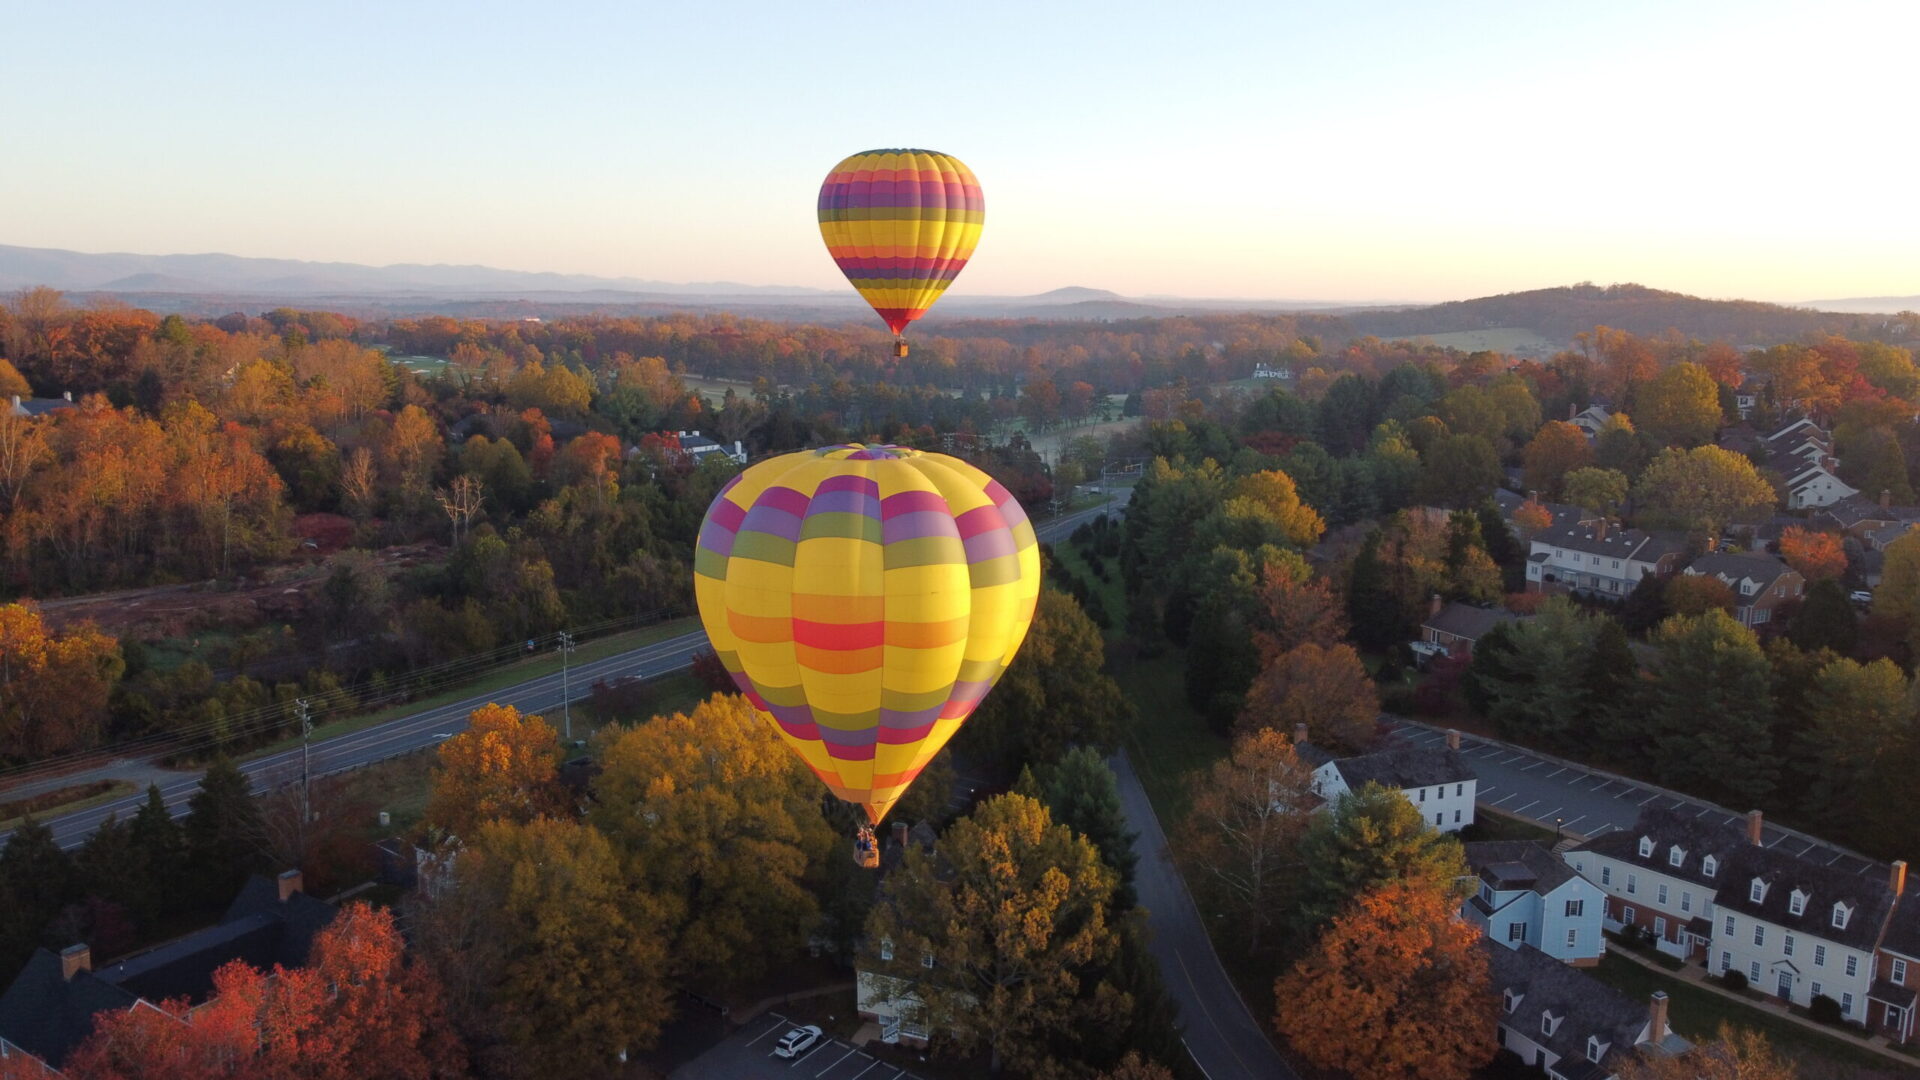 What it Meant to Go Up in a Hot Air Balloon (& Other Thoughts on Redemption and Perseverance)